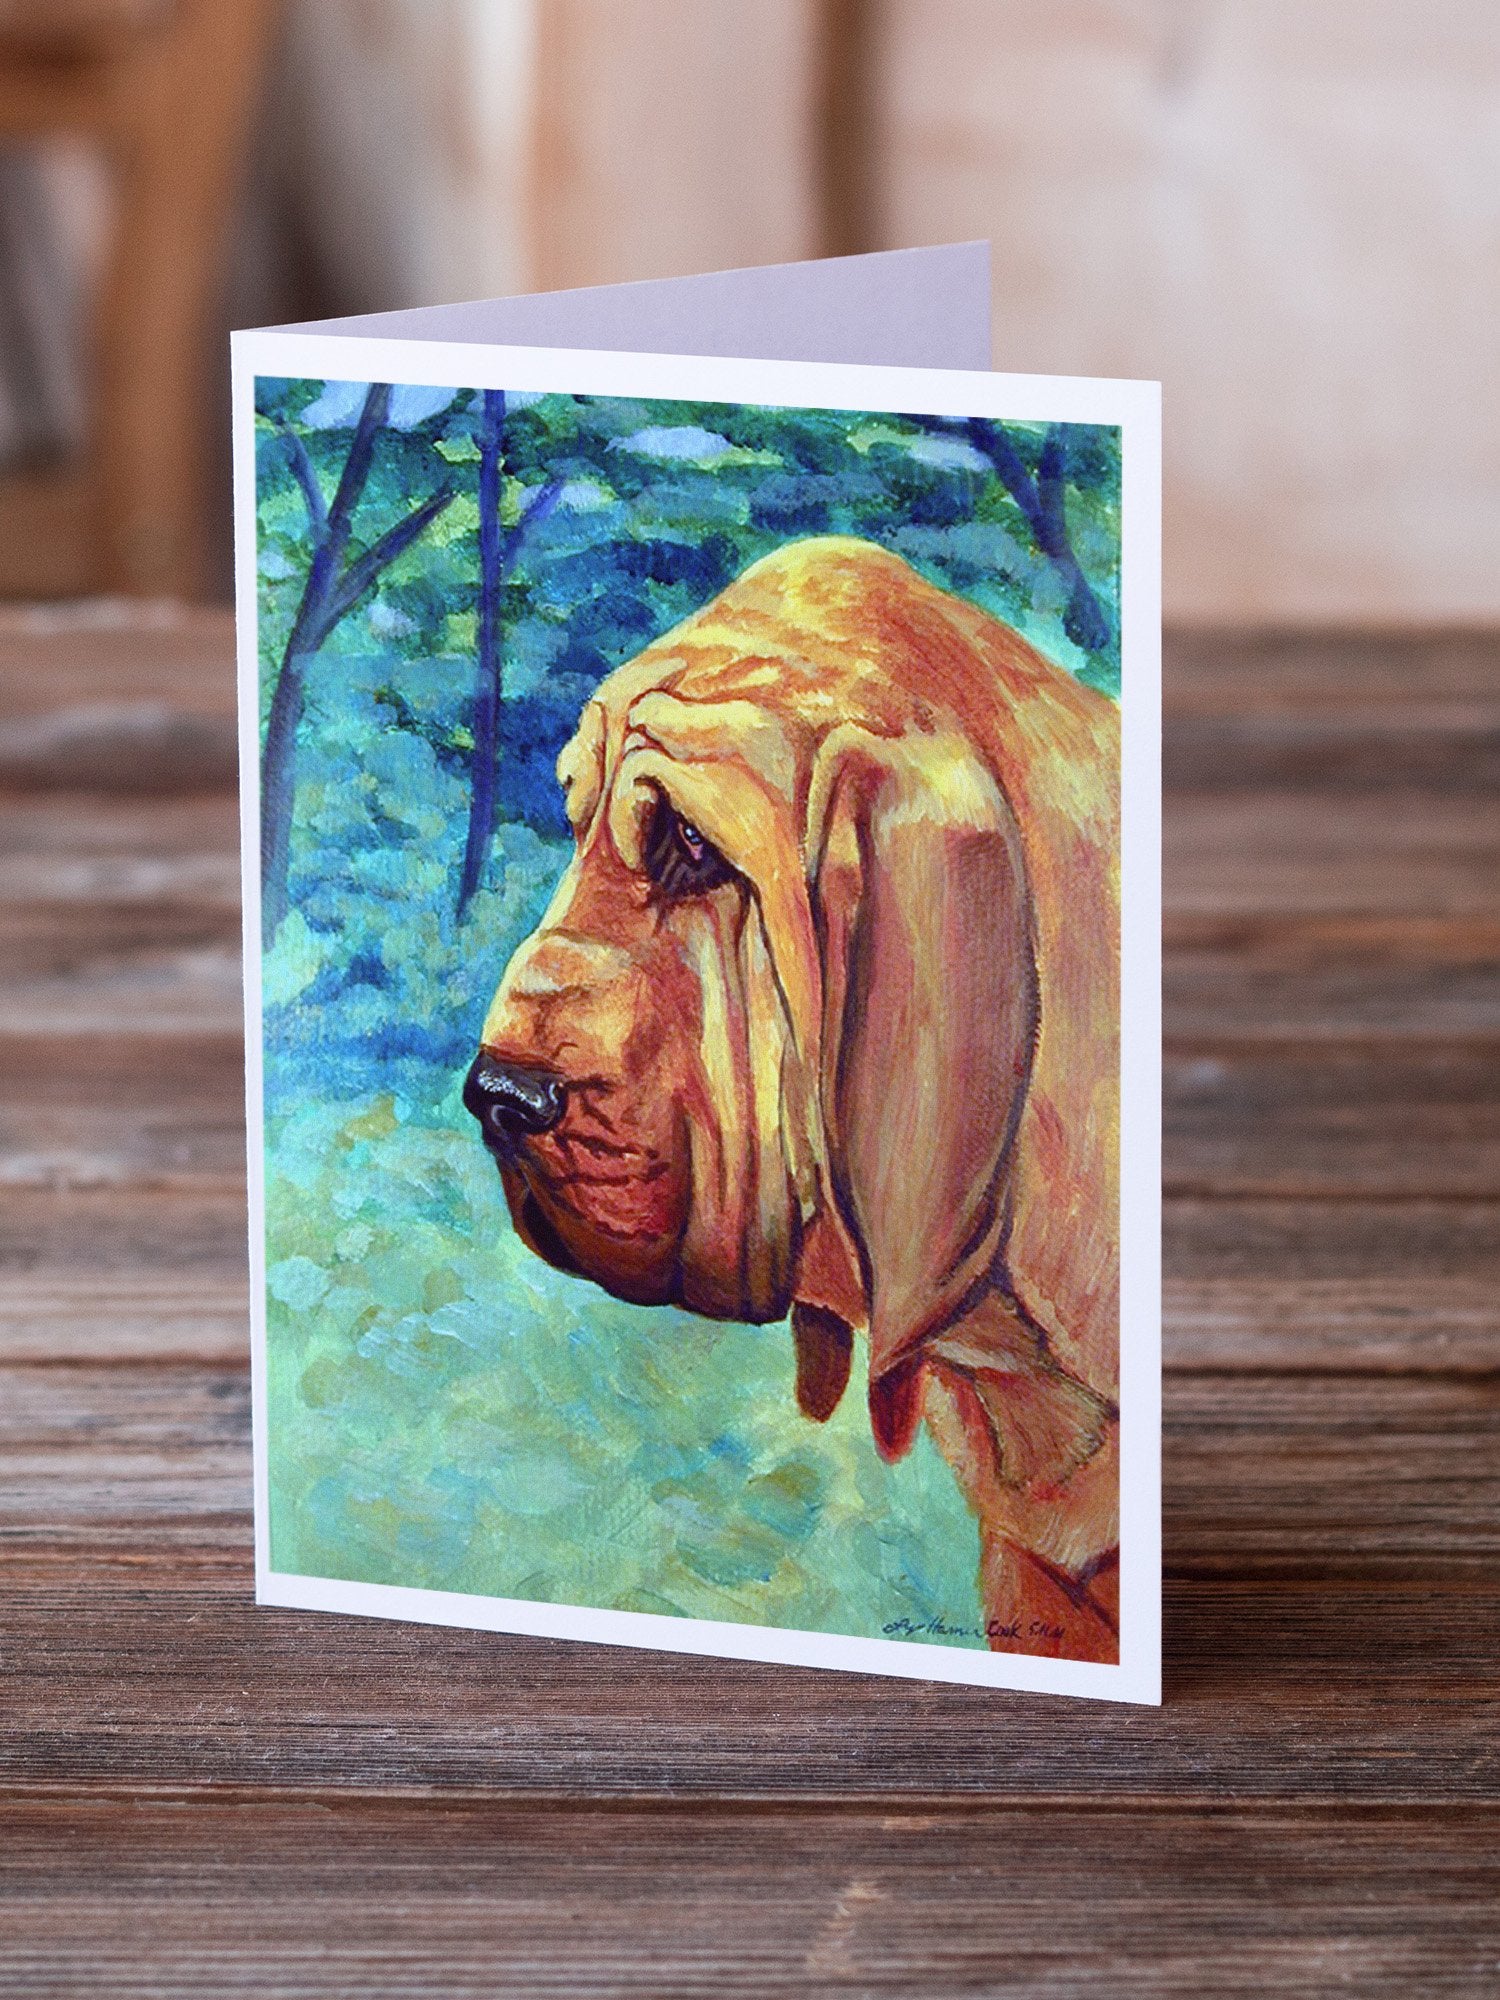 Buy this Bloodhound Greeting Cards and Envelopes Pack of 8